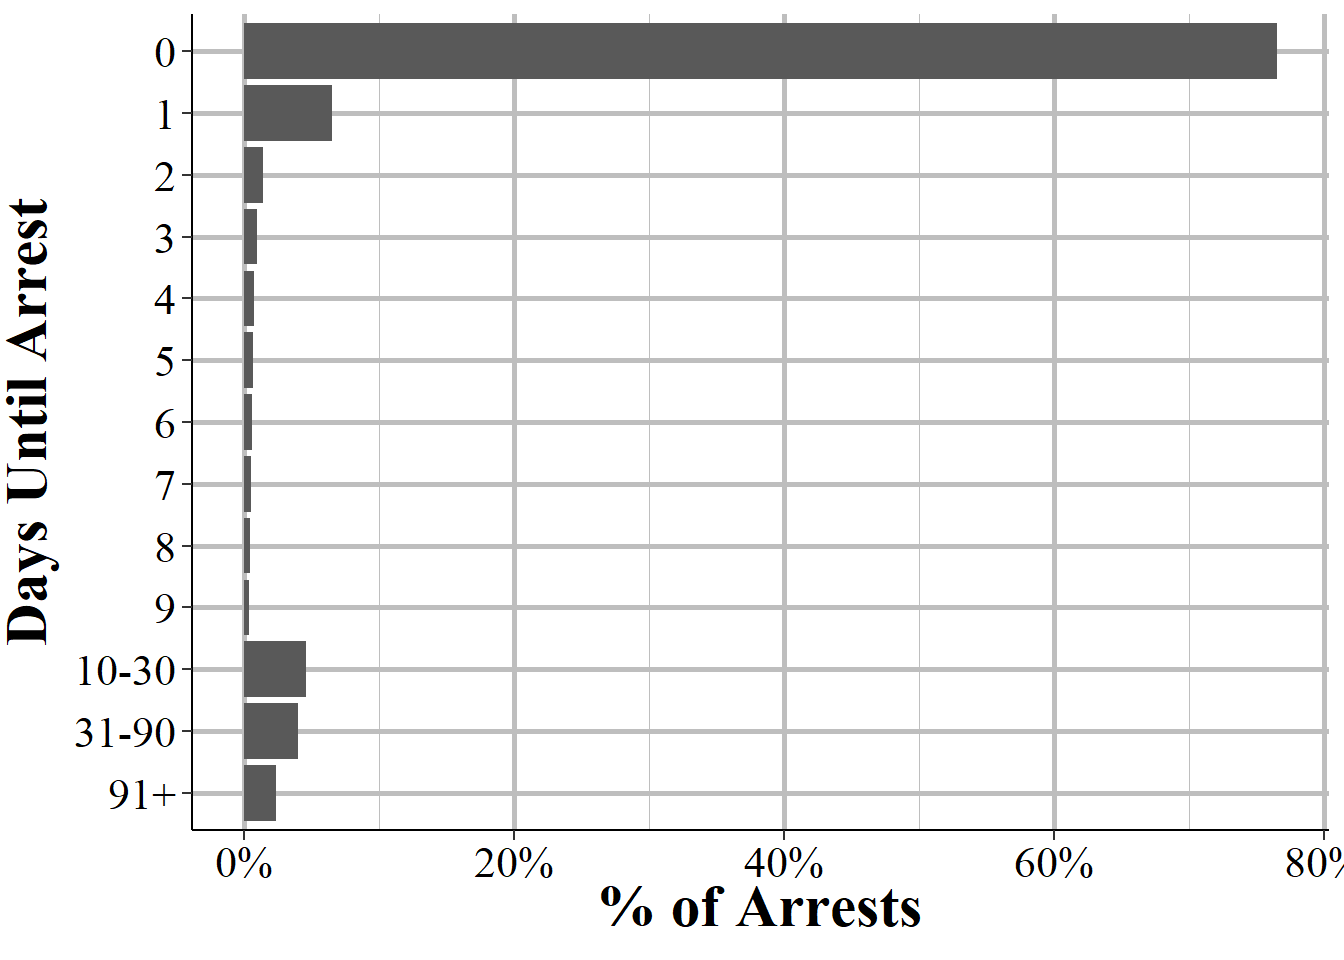 The number of days from the incident to the arrest date. Values over 10 days are grouped to better see the distribution for arrests that took fewer than 10 days. Zero days means that the arrest occurred on the same day as the incident.